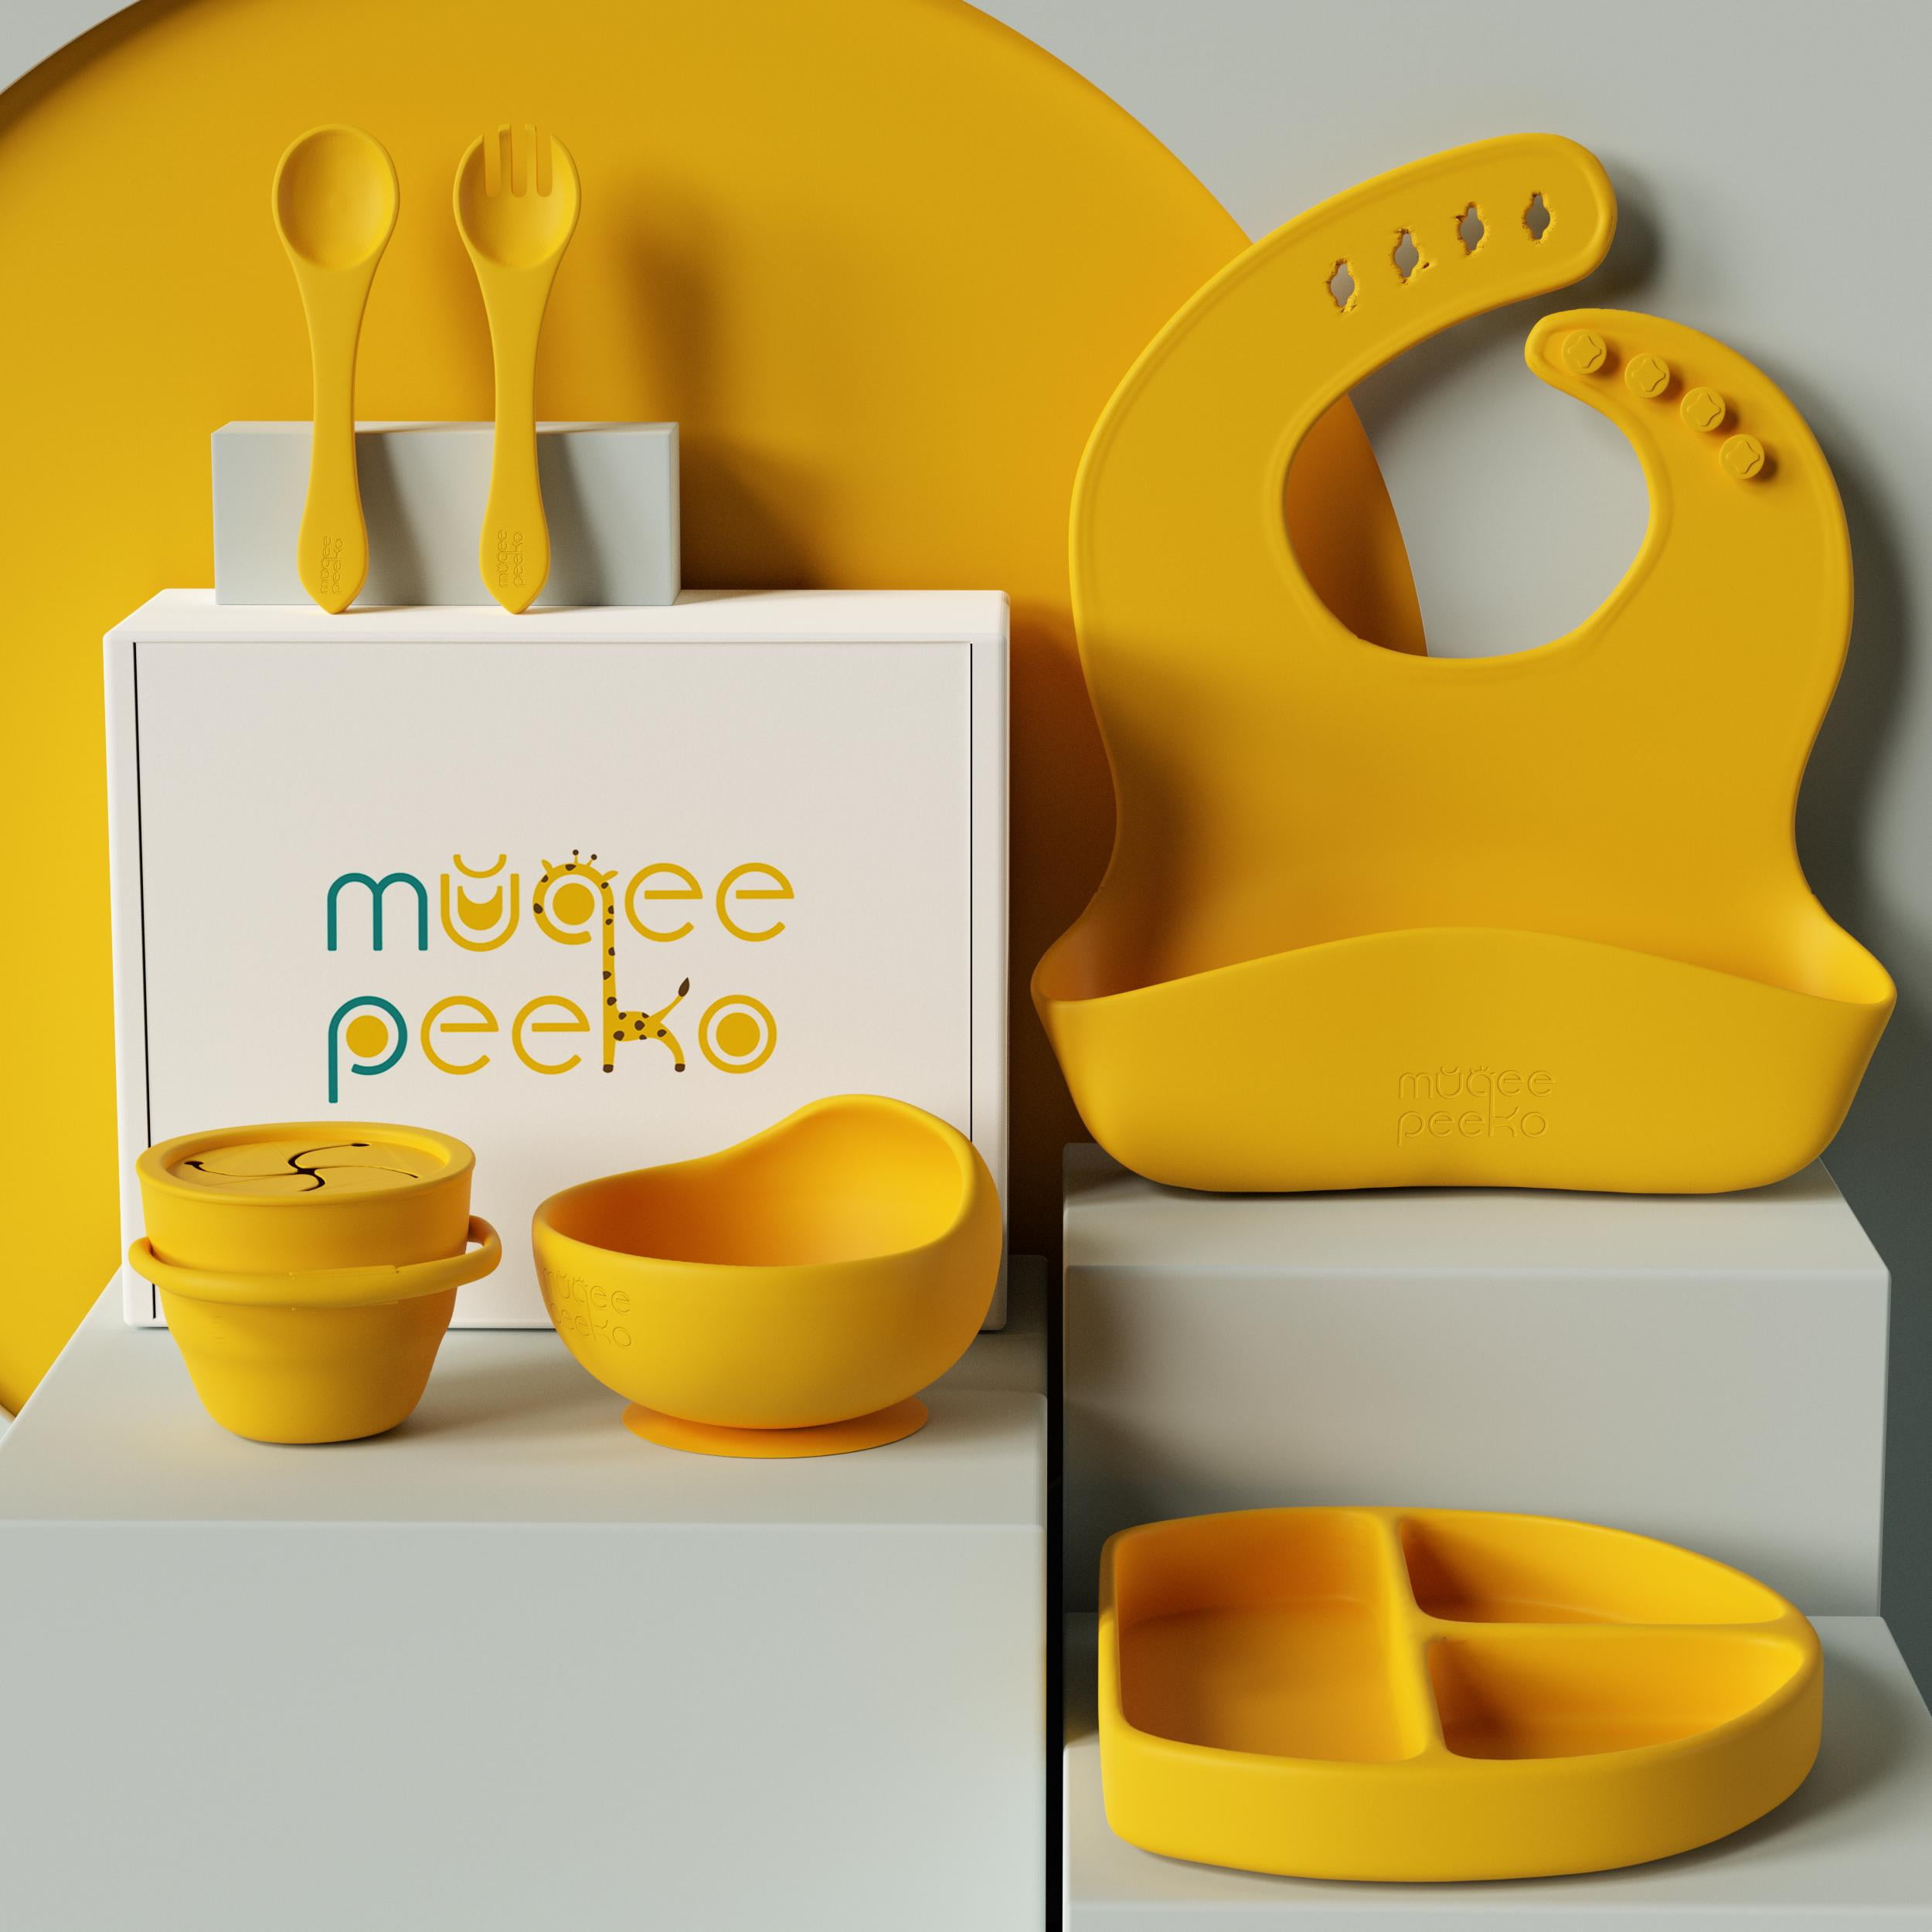 HEQUSIGNS Silicone Baby Feeding Set, 8 Piece Baby Led Weaning